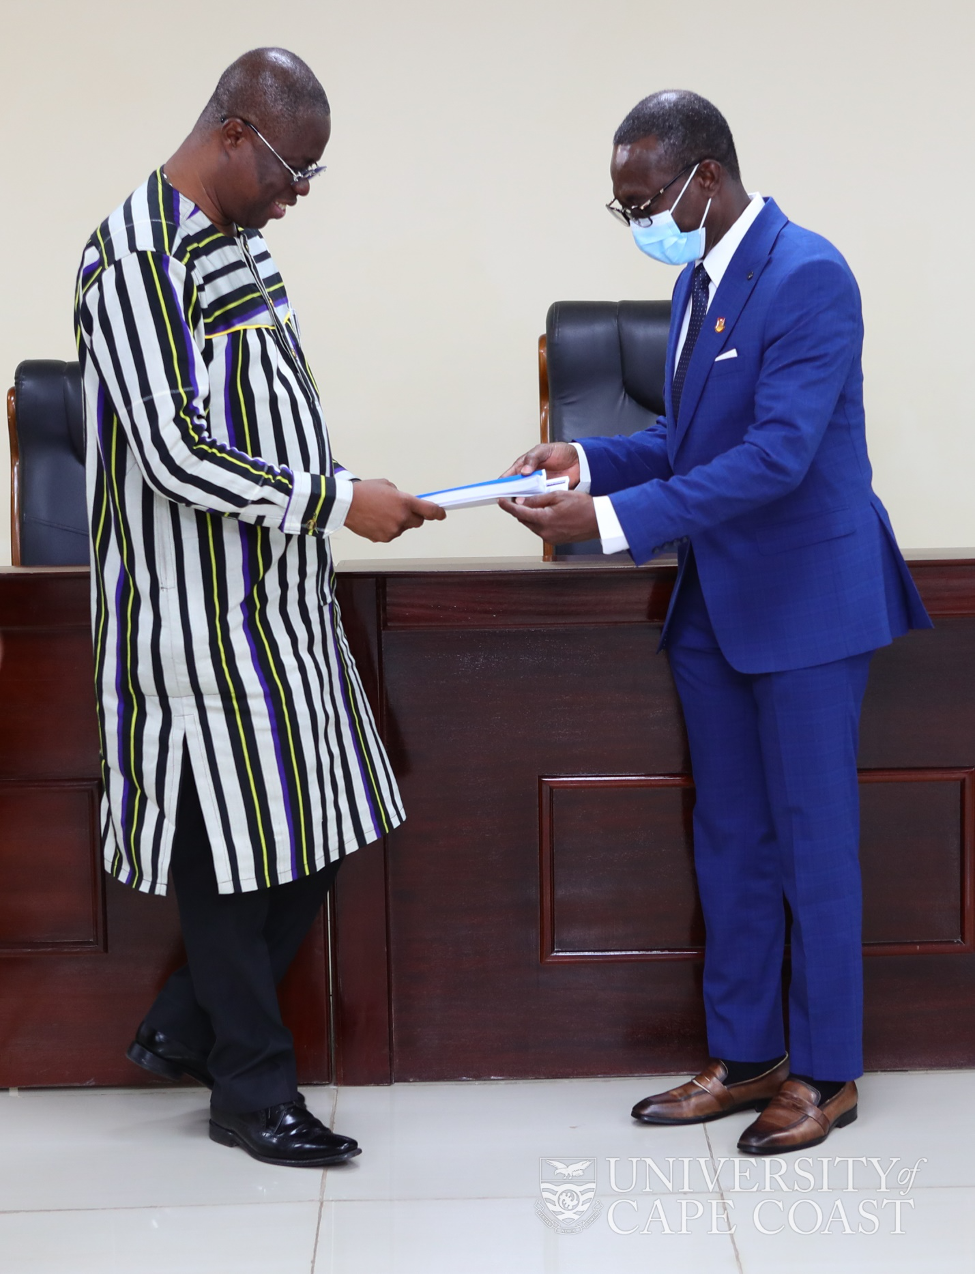 Chairman of the Committee, Prof. Ghartey Ampiah (left) presenting the Committee’s report to the VC, Prof. Nyarko Boampong